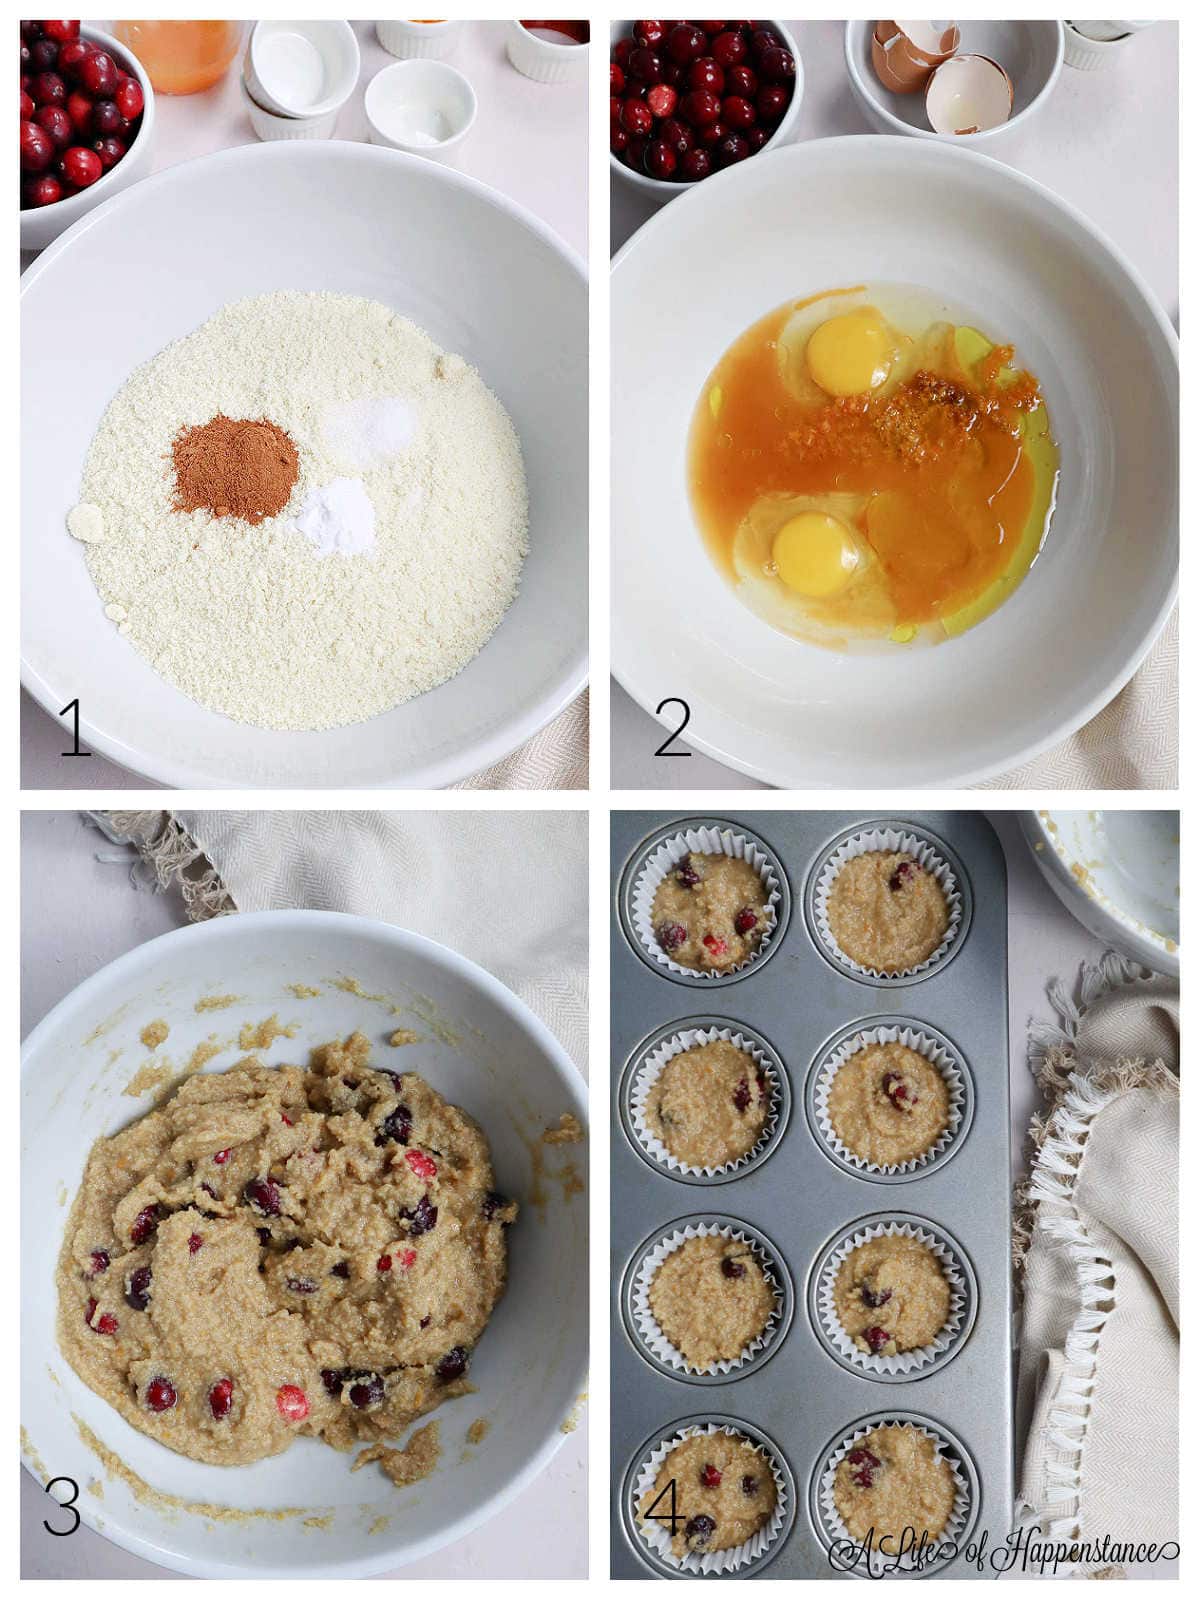 A four photo collage showing how to make the muffins. Photo one; the dry ingredients in a white bowl. Photo two; the wet ingredients in a separate white bowl. Photo three; the batter mixed together along with the cranberries. Photo four; the batter evenly divided among the muffin cups.